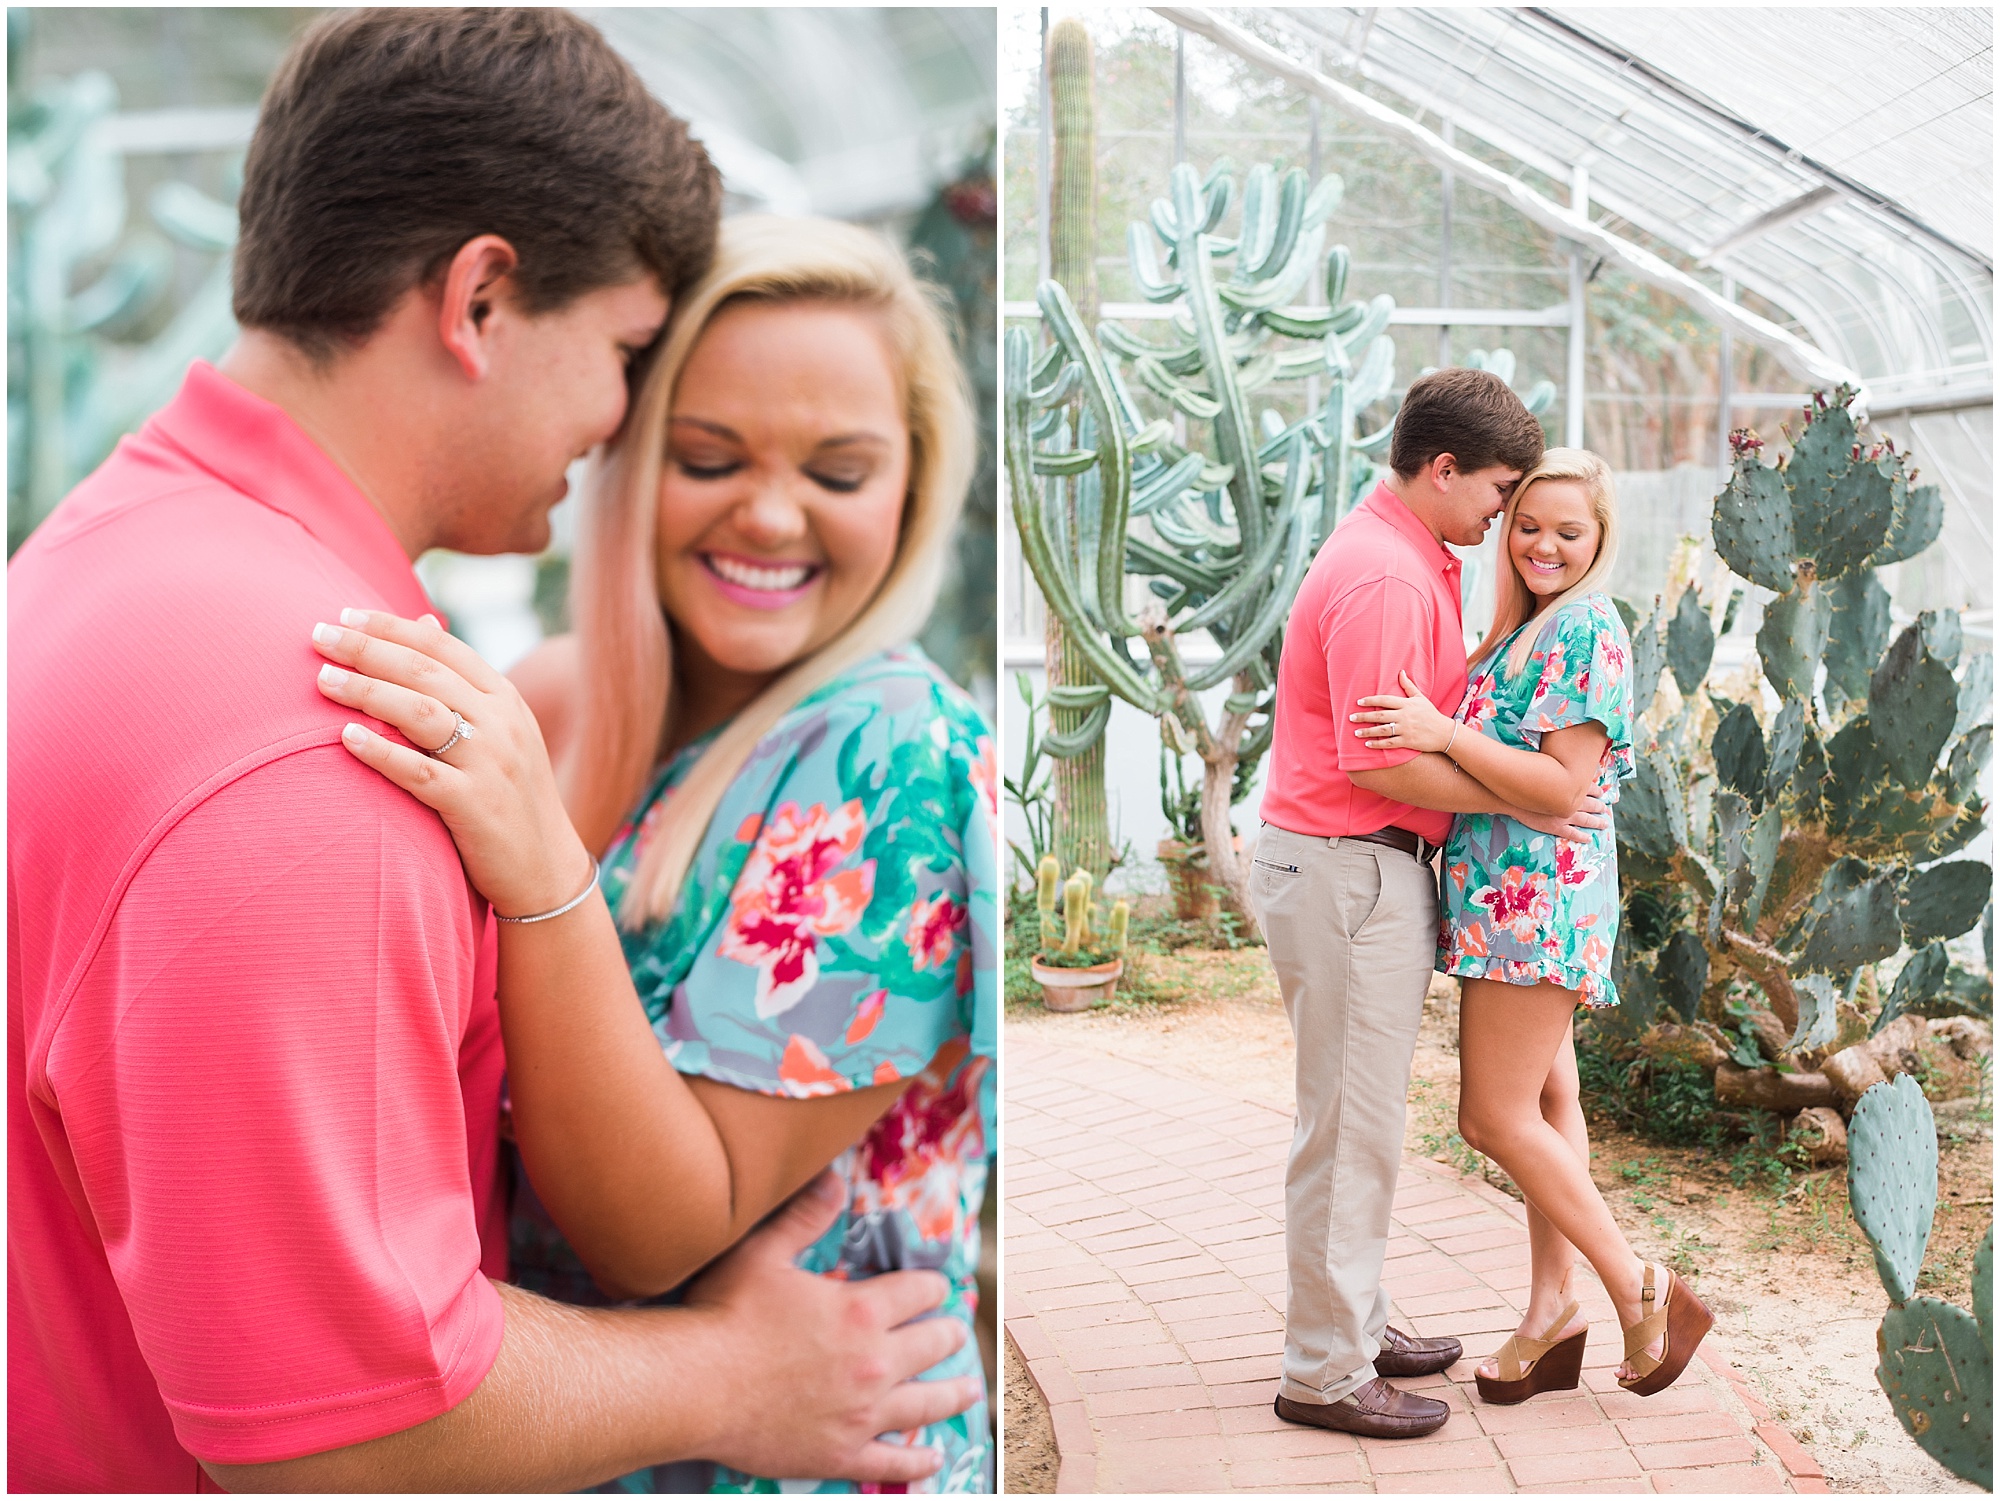 Allie and Channing || Wedding Photographer || Engagement Session in Greenhouse and Gardens|| Mountain Brook and Birmingham, AL